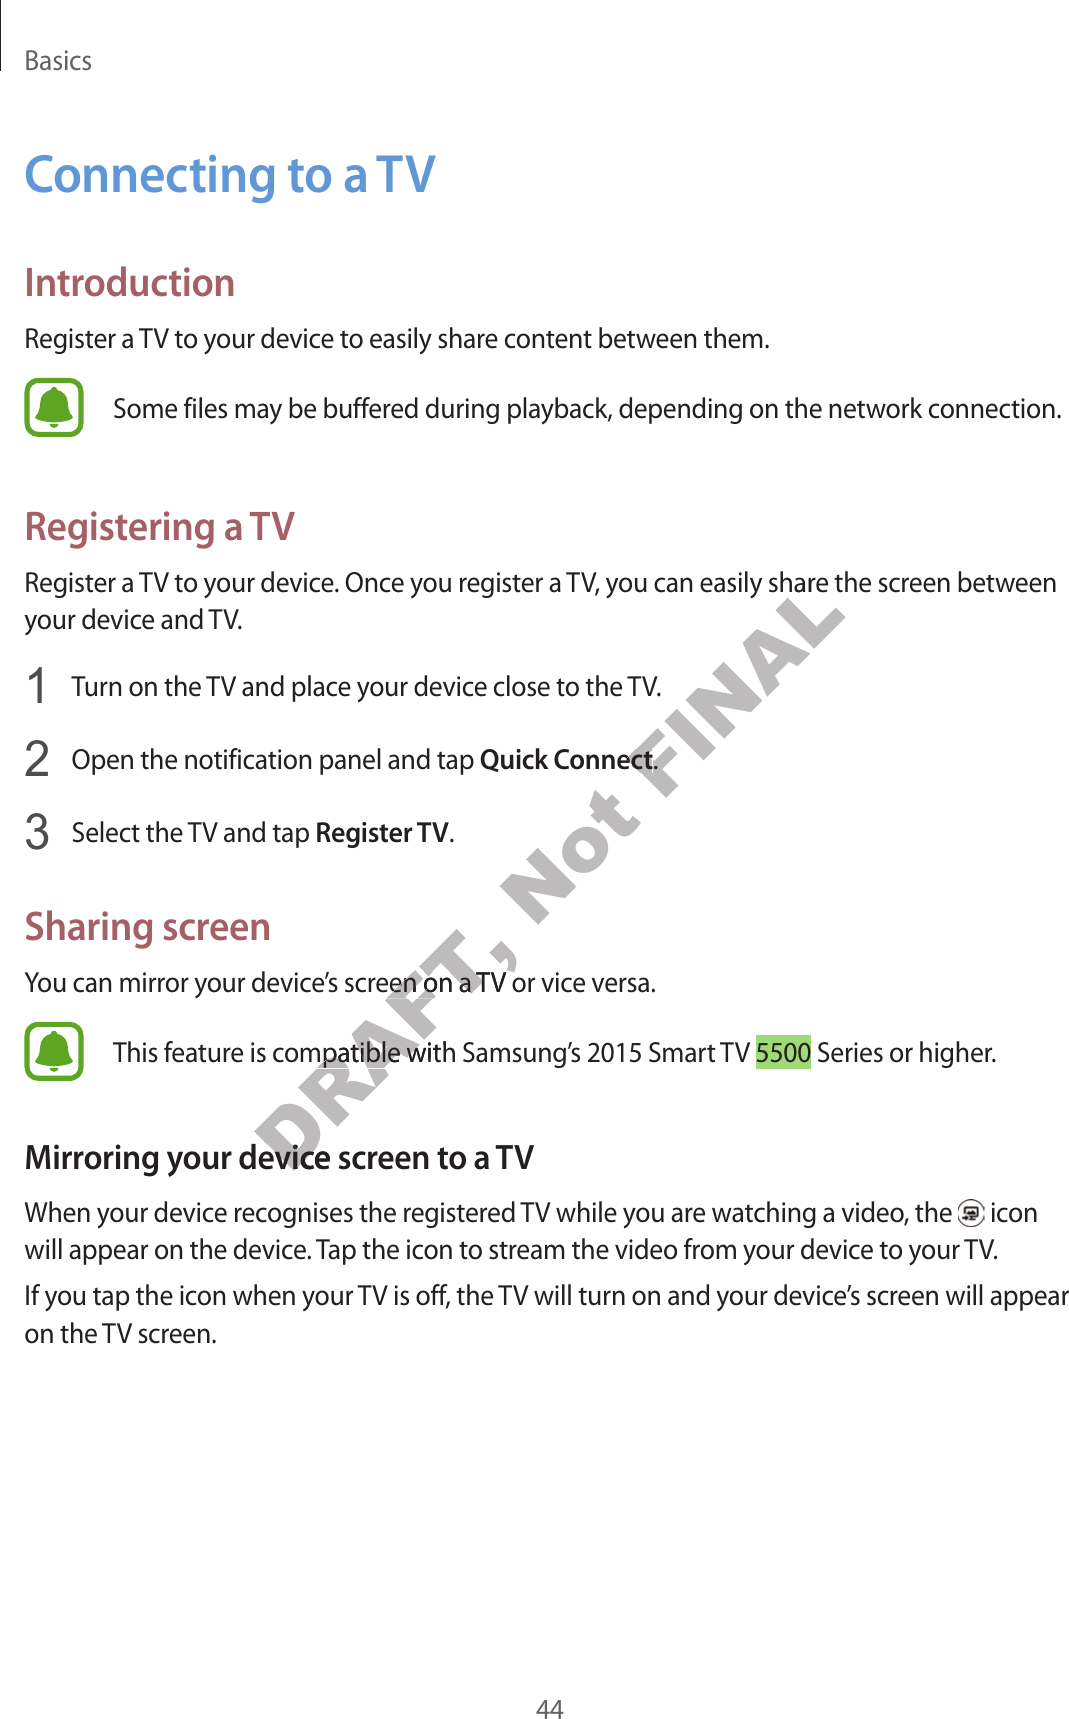 Basics44C onnecting to a TVIntroductionRegister a TV to your device t o easily shar e c ont ent between them.Some files may be buffer ed during pla yback, depending on the network connection.Registering a TVRegister a TV to your device. Once you reg ister a TV, you can easily shar e the scr een between your device and TV.1  Turn on the TV and place your device close to the TV.2  Open the notification panel and tap Quick Connect.3  Select the TV and tap Register TV.Sharing screenYou can mirror your device’s screen on a TV or vice versa.This f eatur e is c ompatible with Samsung’s 2015 Smart TV 5500 Series or higher.Mirroring your de vic e screen t o a TVWhen your devic e r ecog nises the r eg ister ed TV while you are wat ching a video, the   icon will appear on the device . Tap the icon to stream the video from y our devic e t o y our TV.If you tap the icon when your TV is off , the TV will turn on and your devic e’s screen will appear on the TV screen.DRAFT, You can mirror your device’s screen on a TV or vice versa.DRAFT, You can mirror your device’s screen on a TV or vice versa.DRAFT, This f eatur e is c ompatible with Samsung’s 2015 Smart TV DRAFT, This f eatur e is c ompatible with Samsung’s 2015 Smart TV Mirroring your de vic e screen t o a TVDRAFT, Mirroring your de vic e screen t o a TVNot FINALRegister a TV to your device. Once you reg ister a TV, you can easily shar e the scr een between FINALRegister a TV to your device. Once you reg ister a TV, you can easily shar e the scr een between Quick ConnectFINALQuick Connect.FINAL.